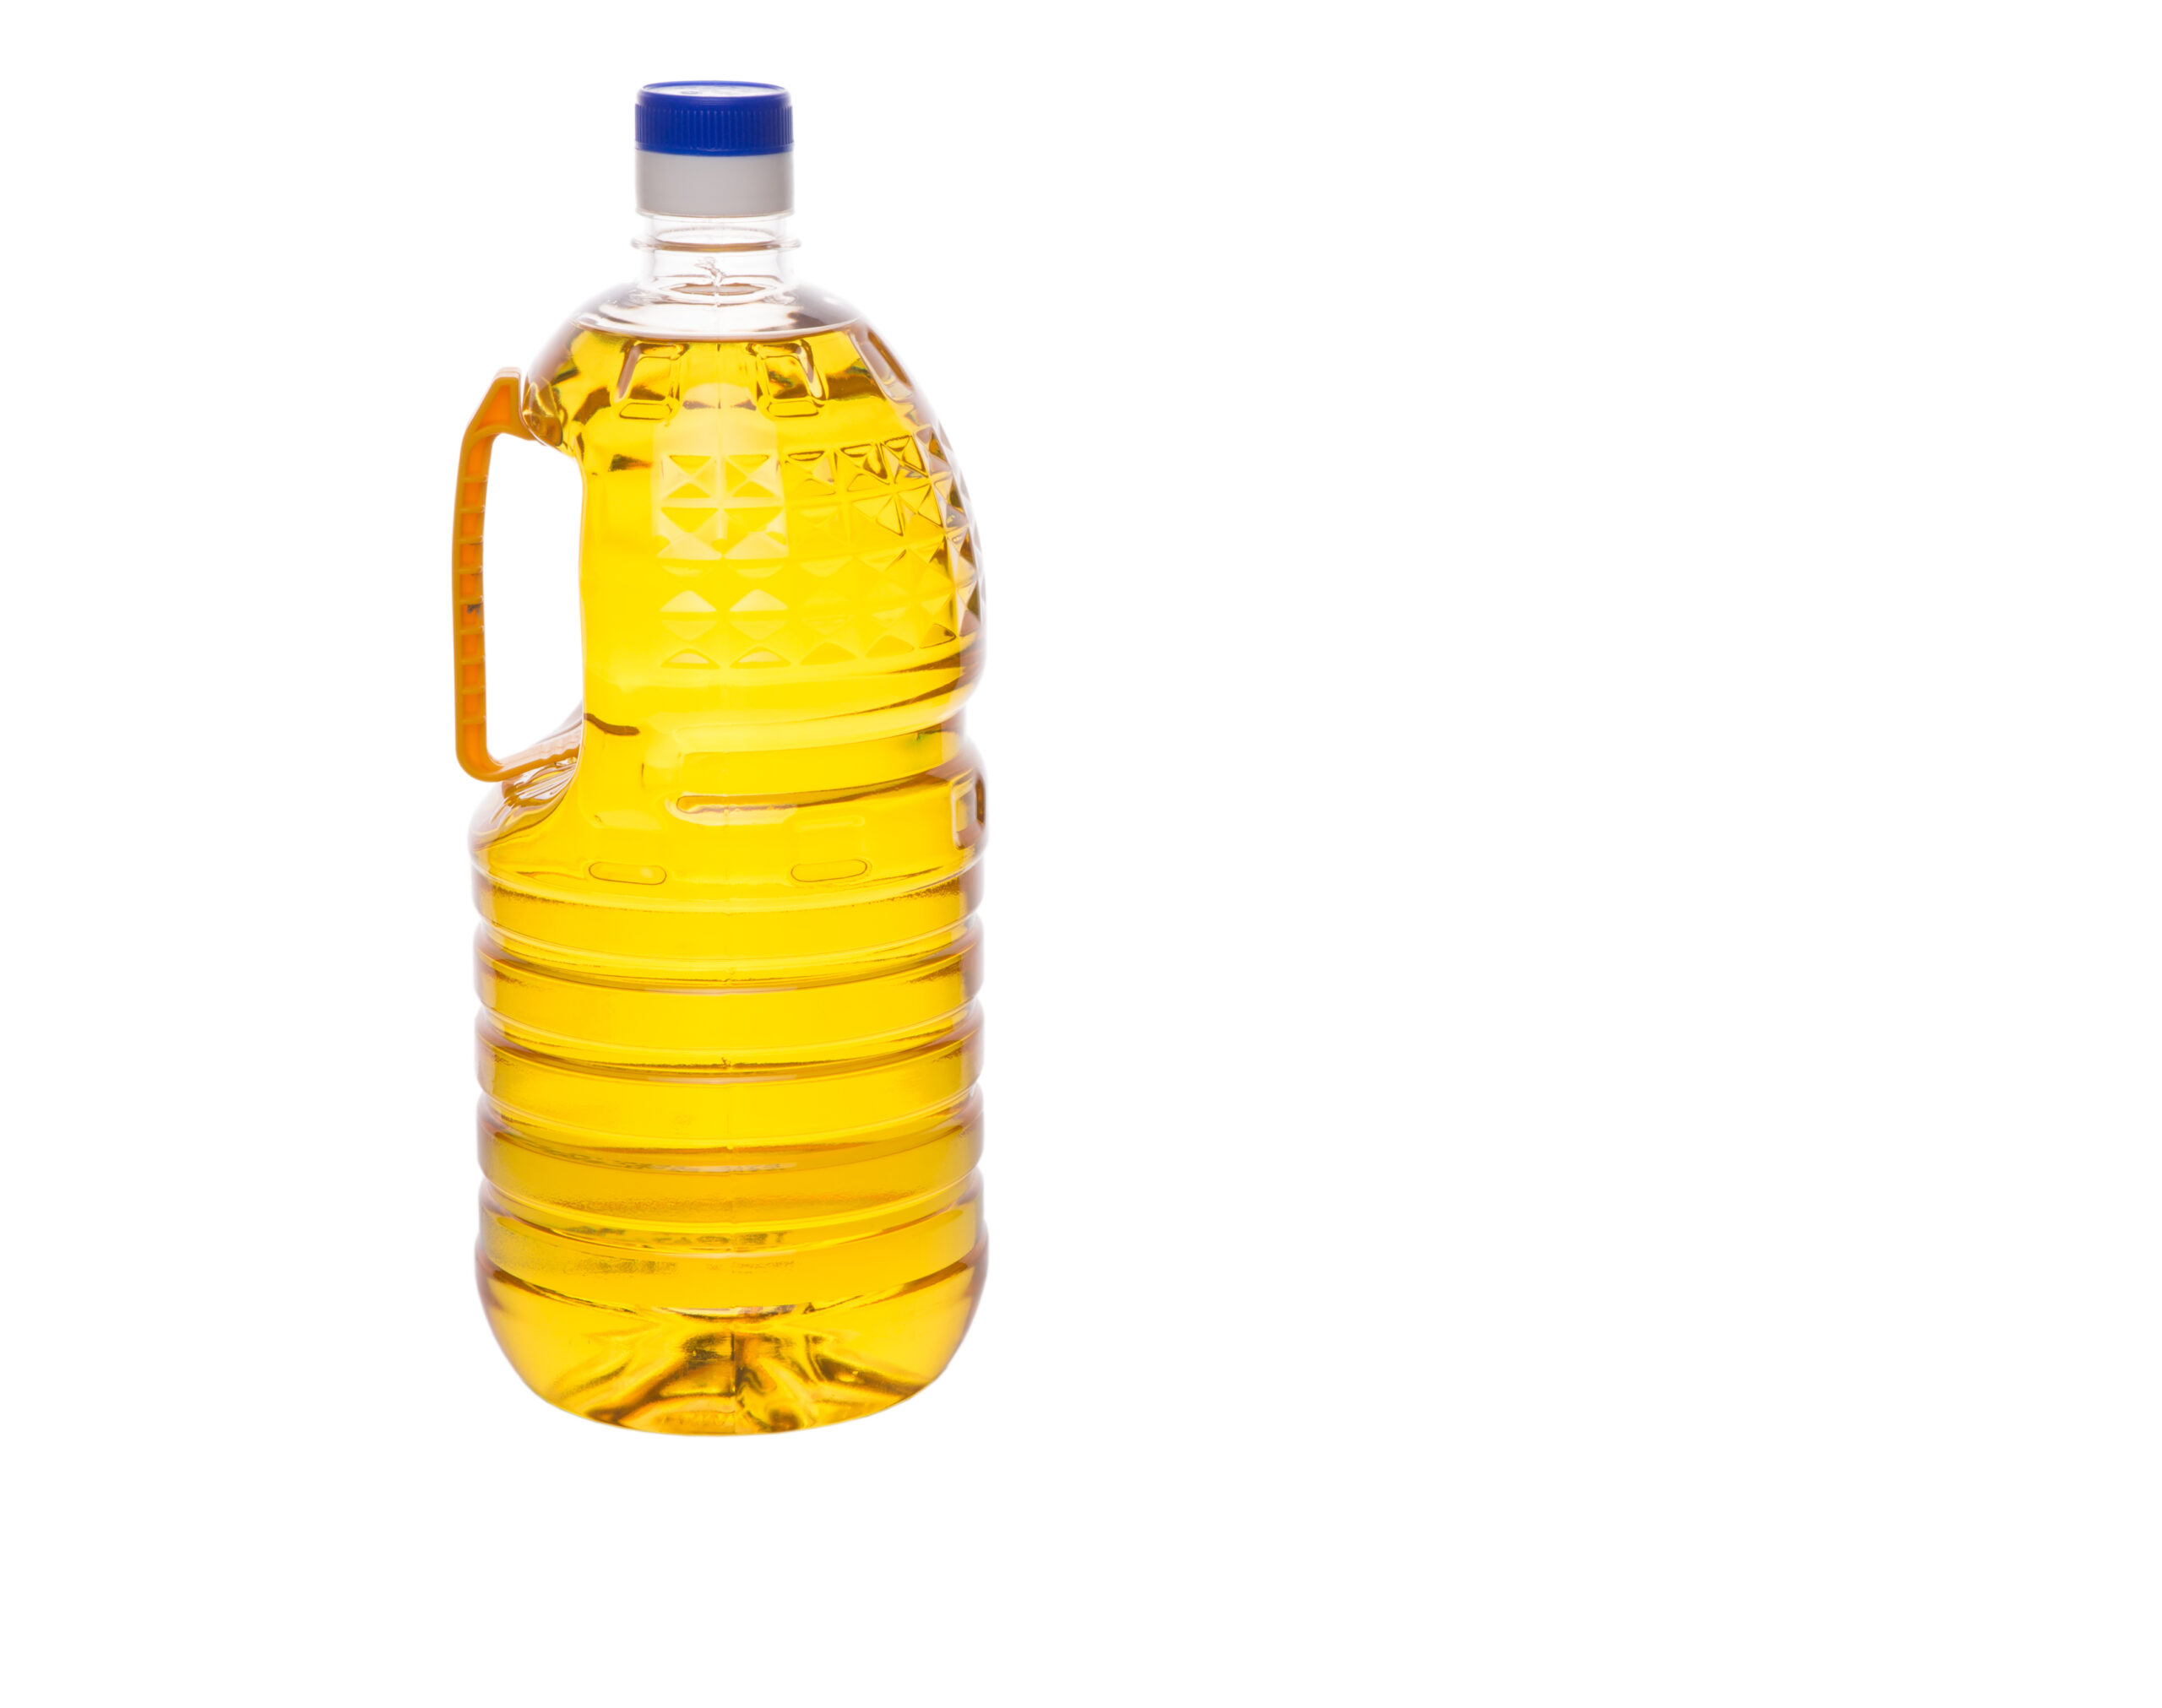 Canola Oil Linked To Worsening Memory, Dementia, And Weight Gain